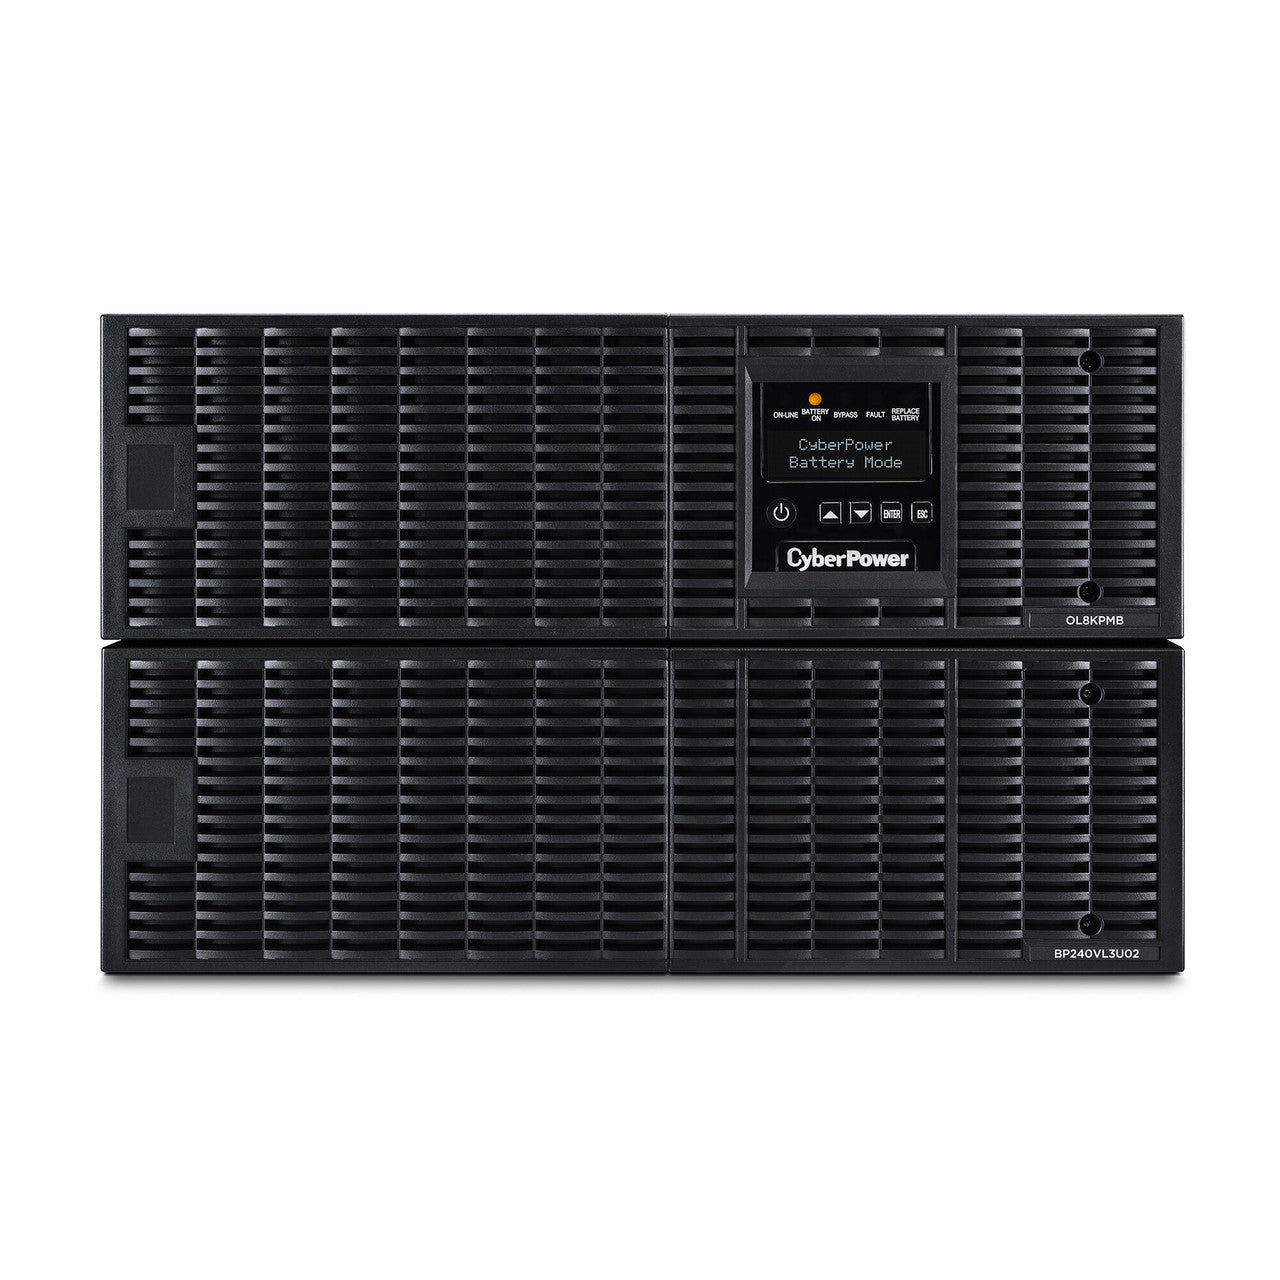 CyberPower OL8KRTHW 8KVA/8KW, online double-conversion UPS, PF=1, 6U rack/tower convertible